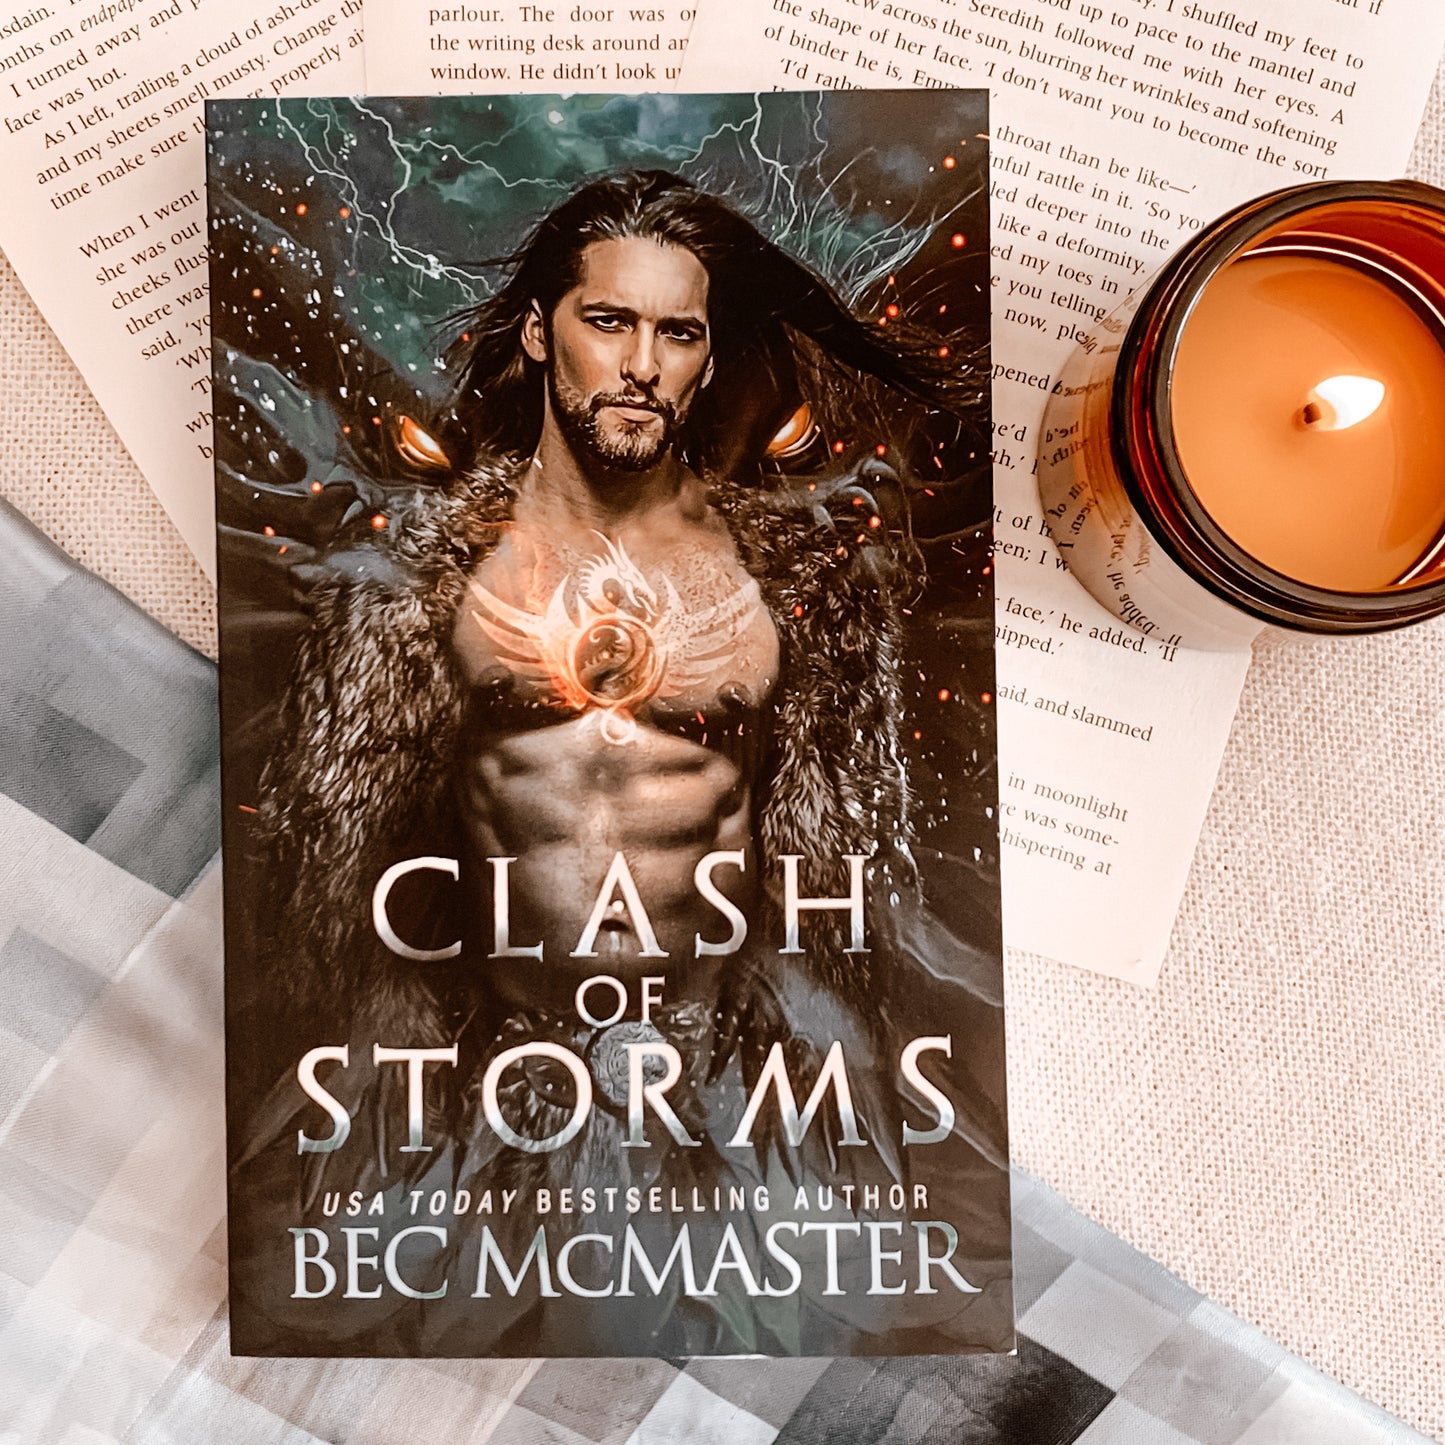 Legends of the Storm series by Bec McMaster